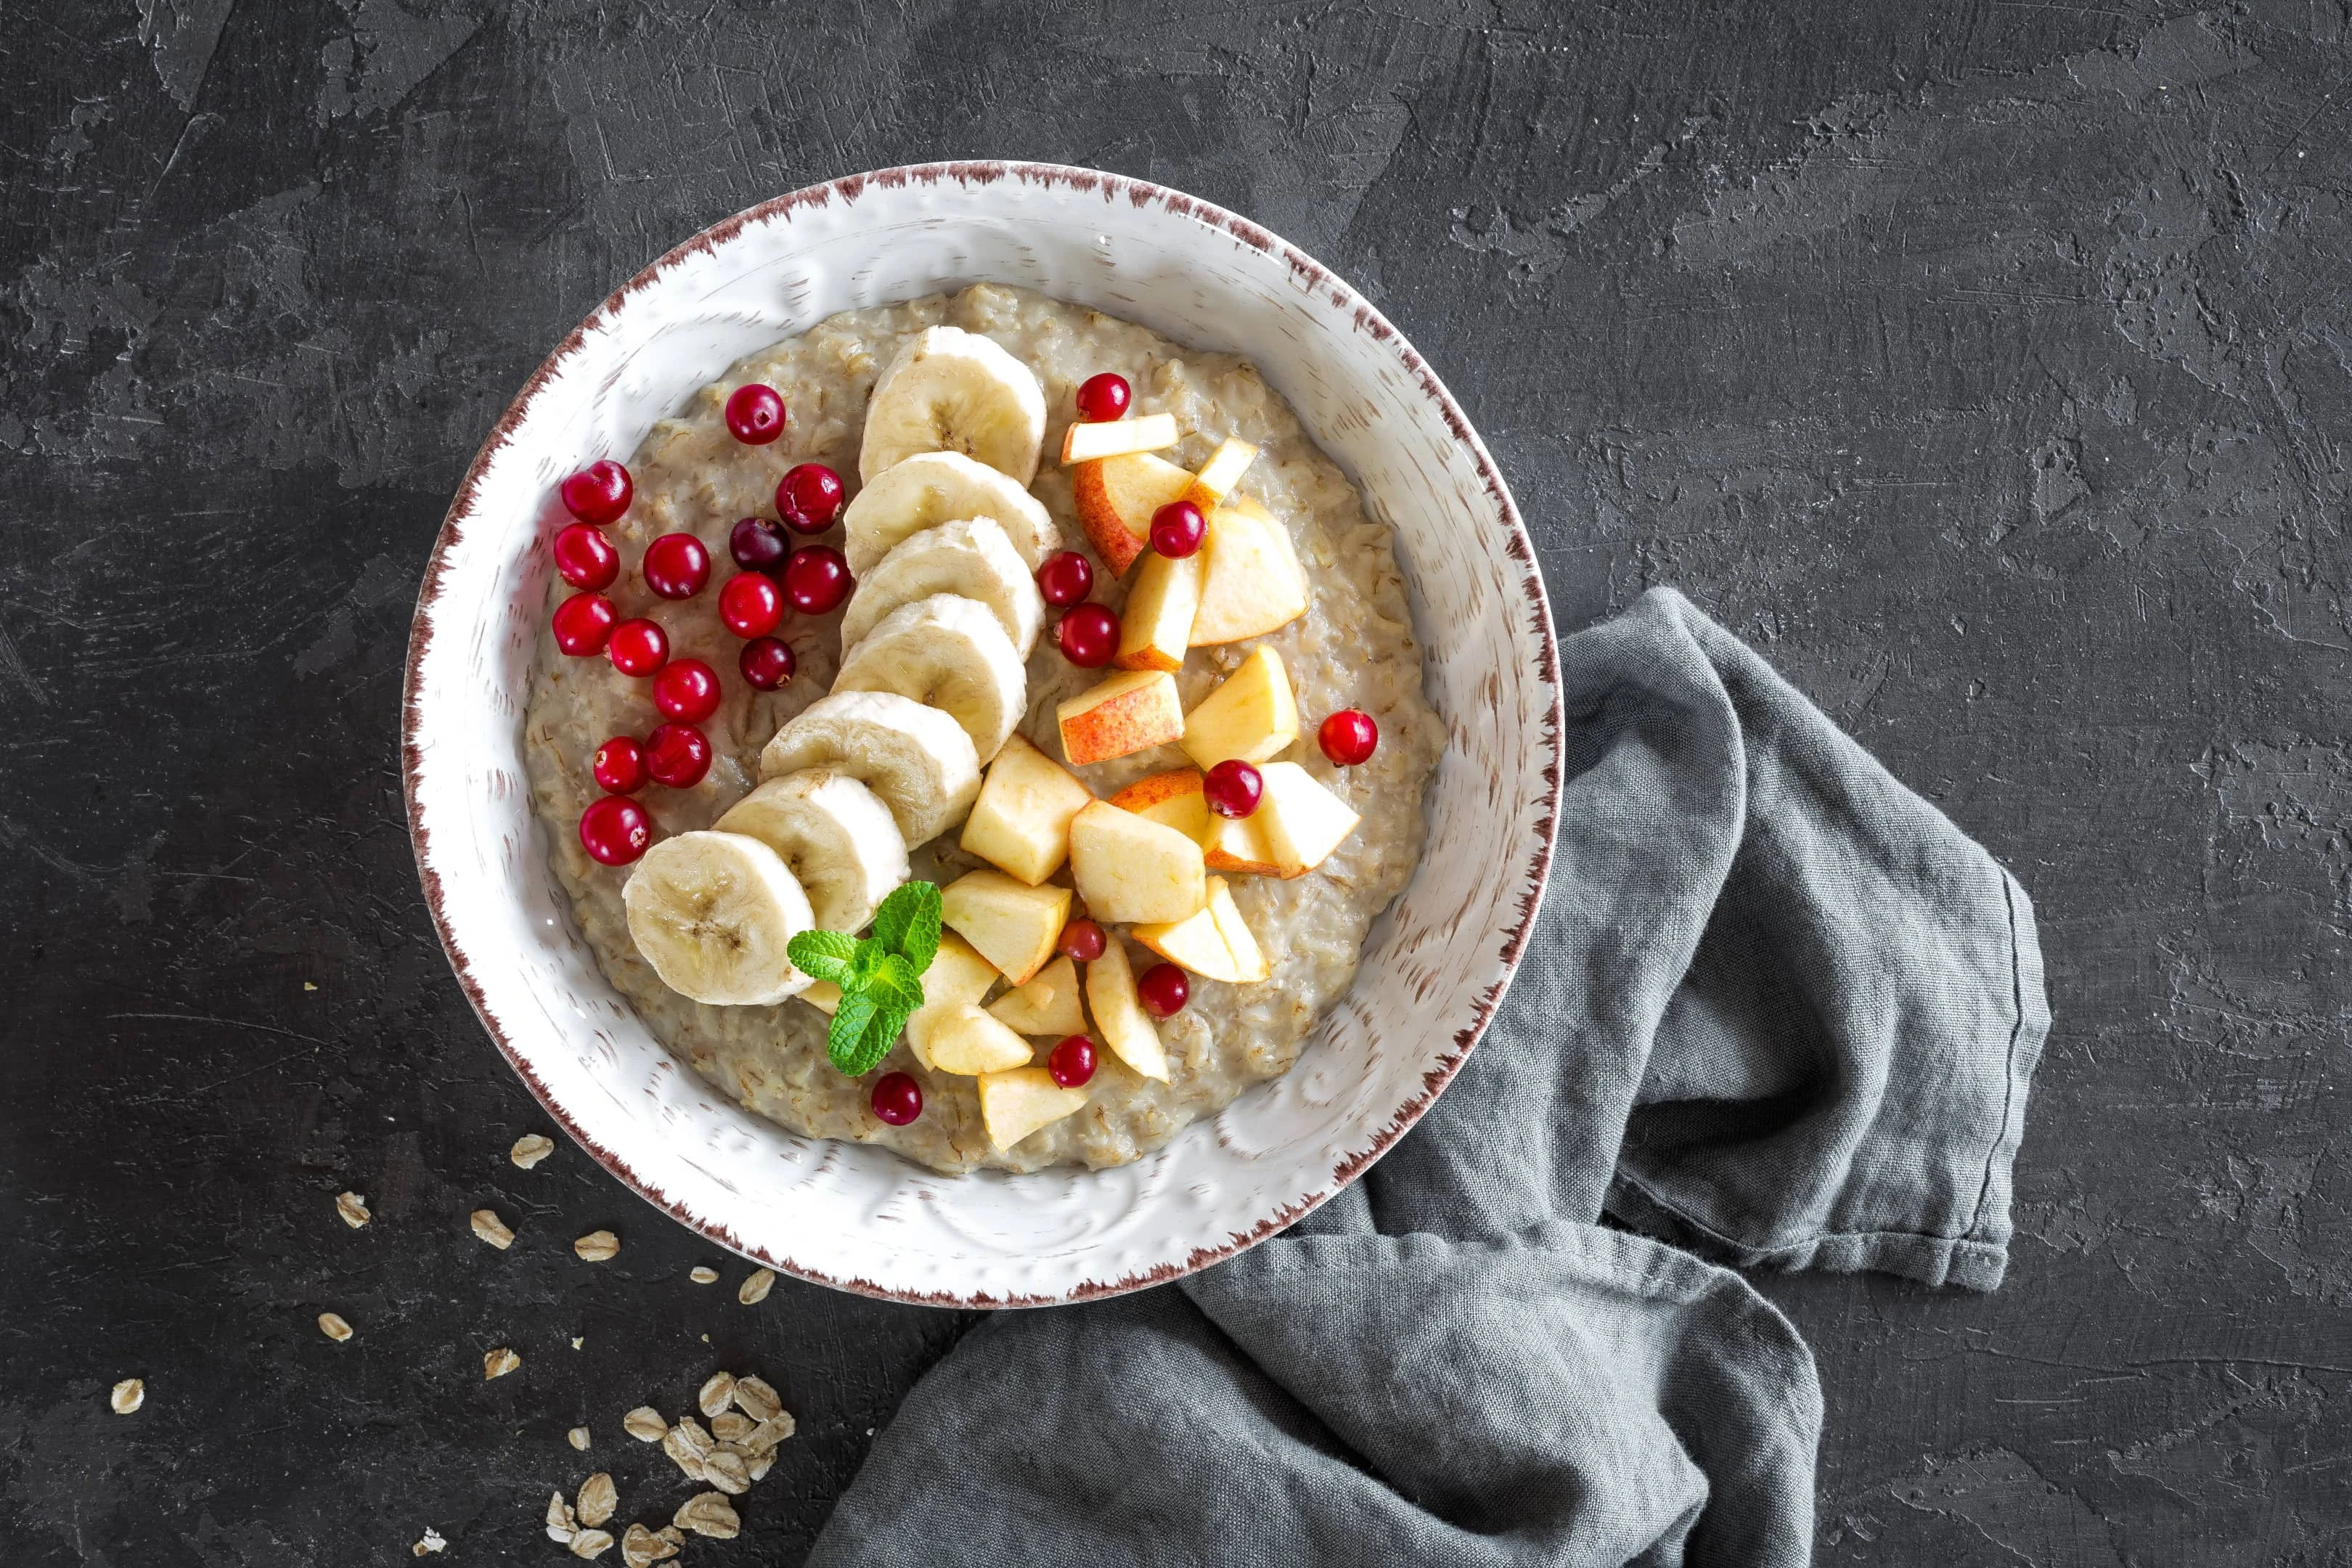 Oatmeal porridge with banana and apple which are on our list of foods without citric acid